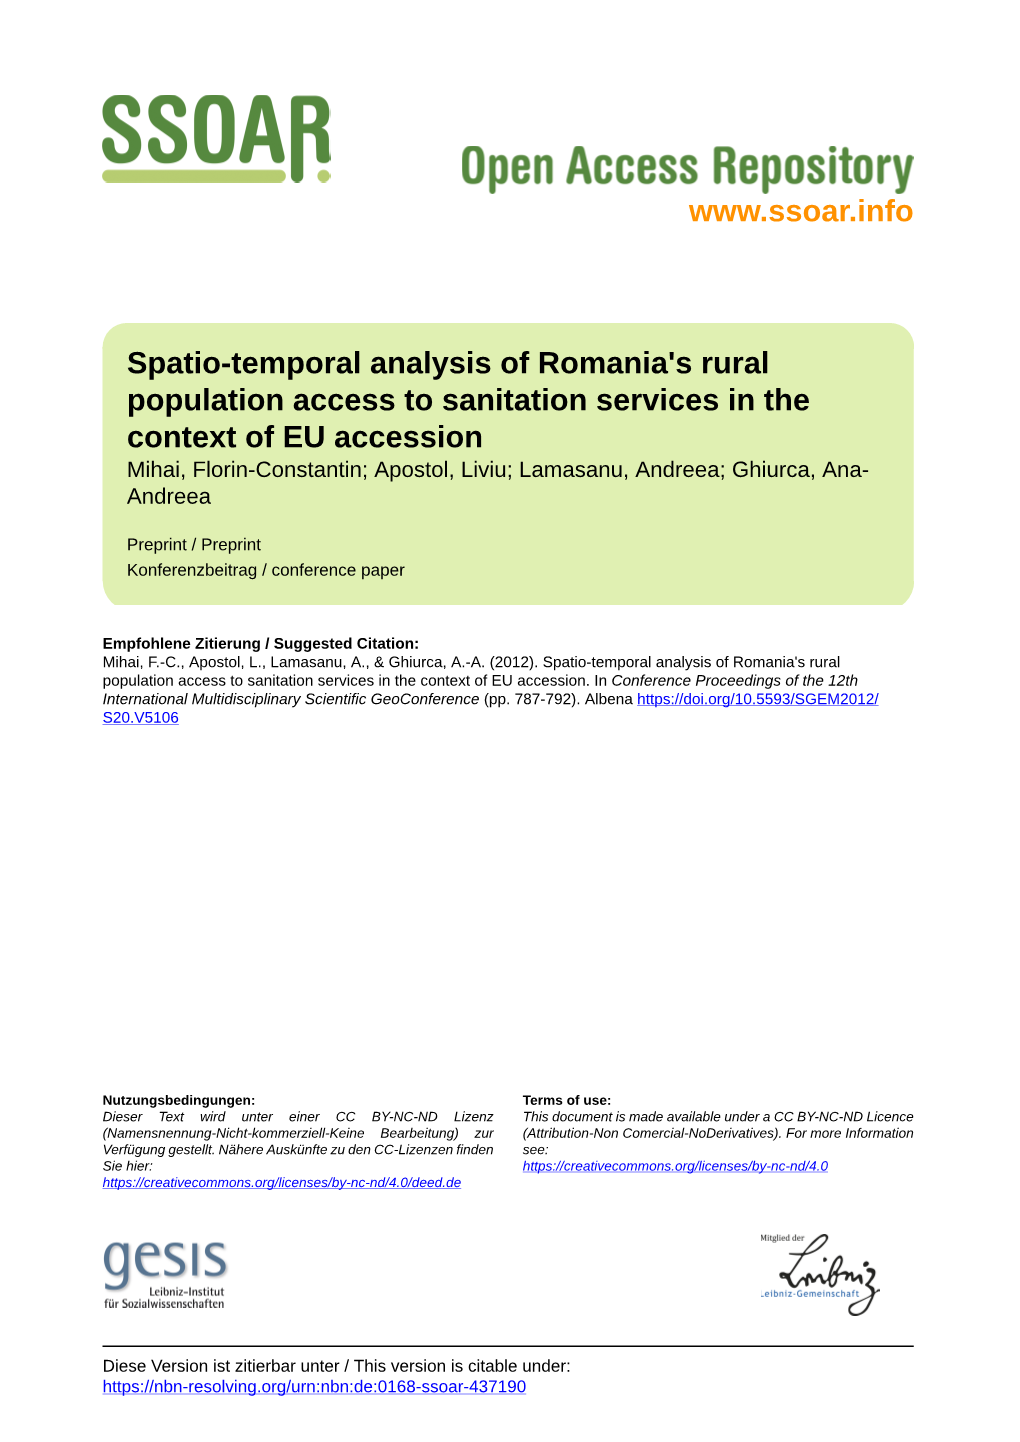 Spatio-Temporal Analysis of Romania's Rural Population Access to Sanitation Services in the Context of EU Accession